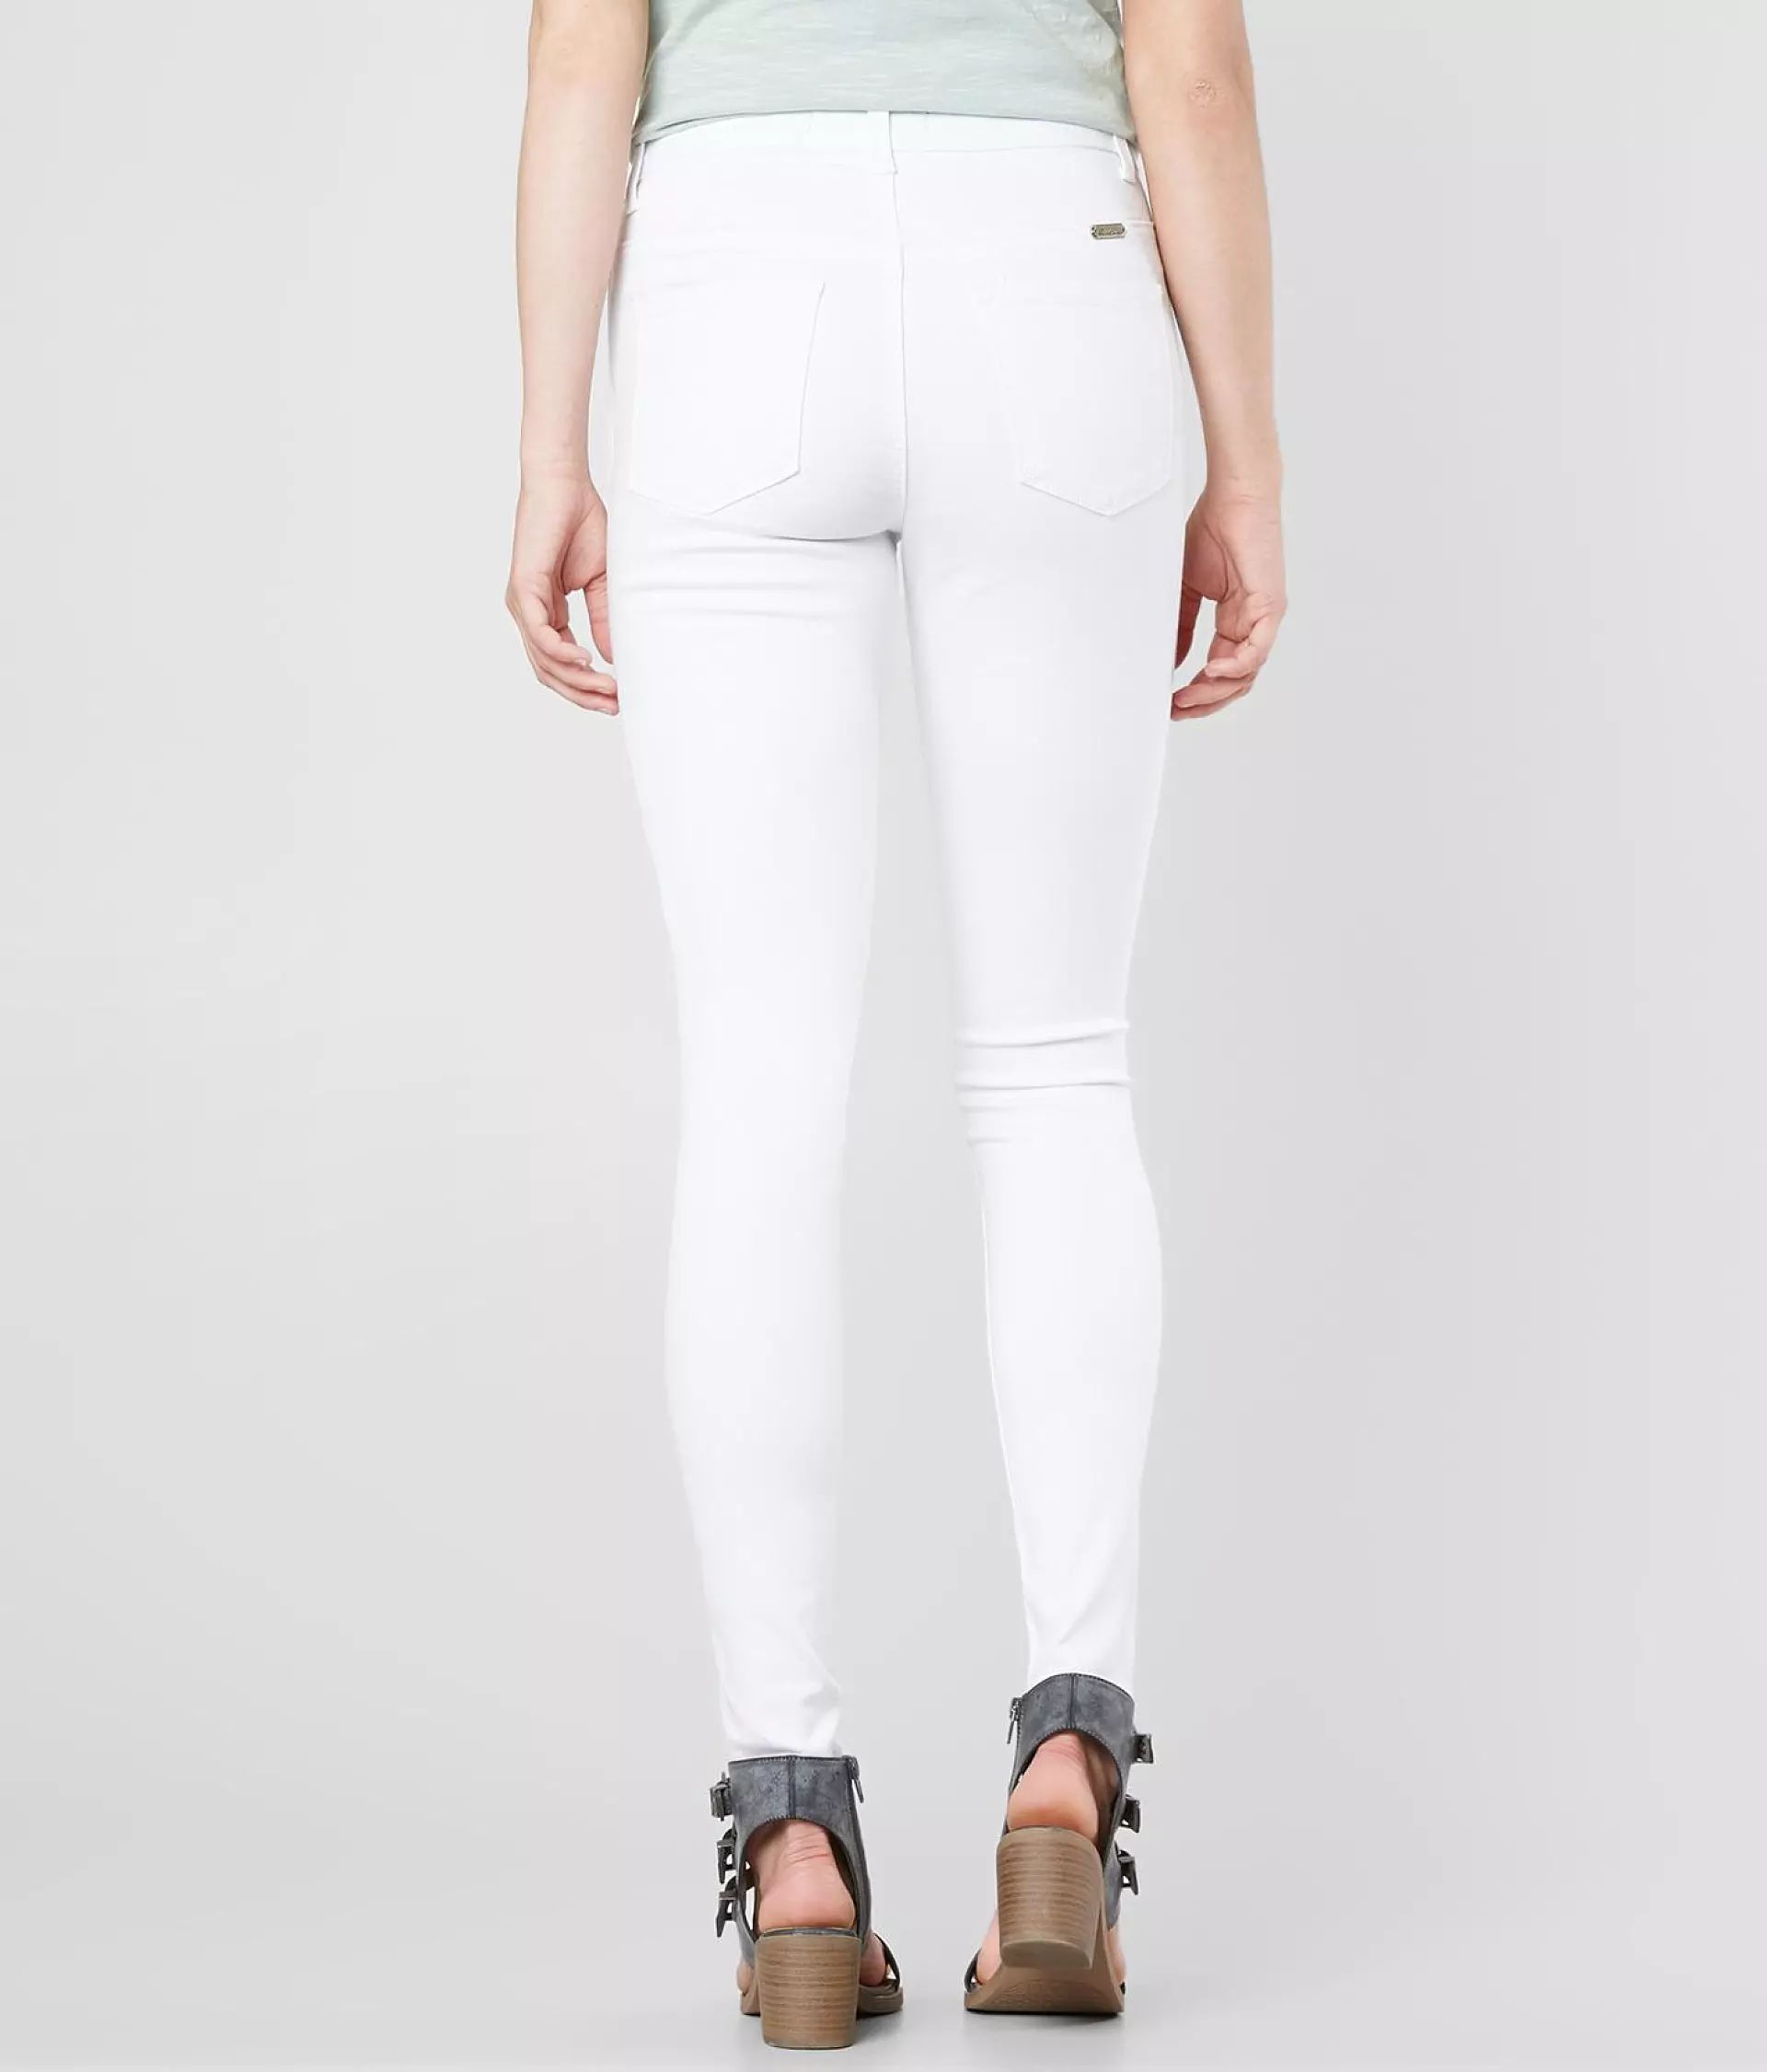 KanCan High Rise Ankle Skinny Stretch Jean - Women's Jeans in White | Buckle | Buckle